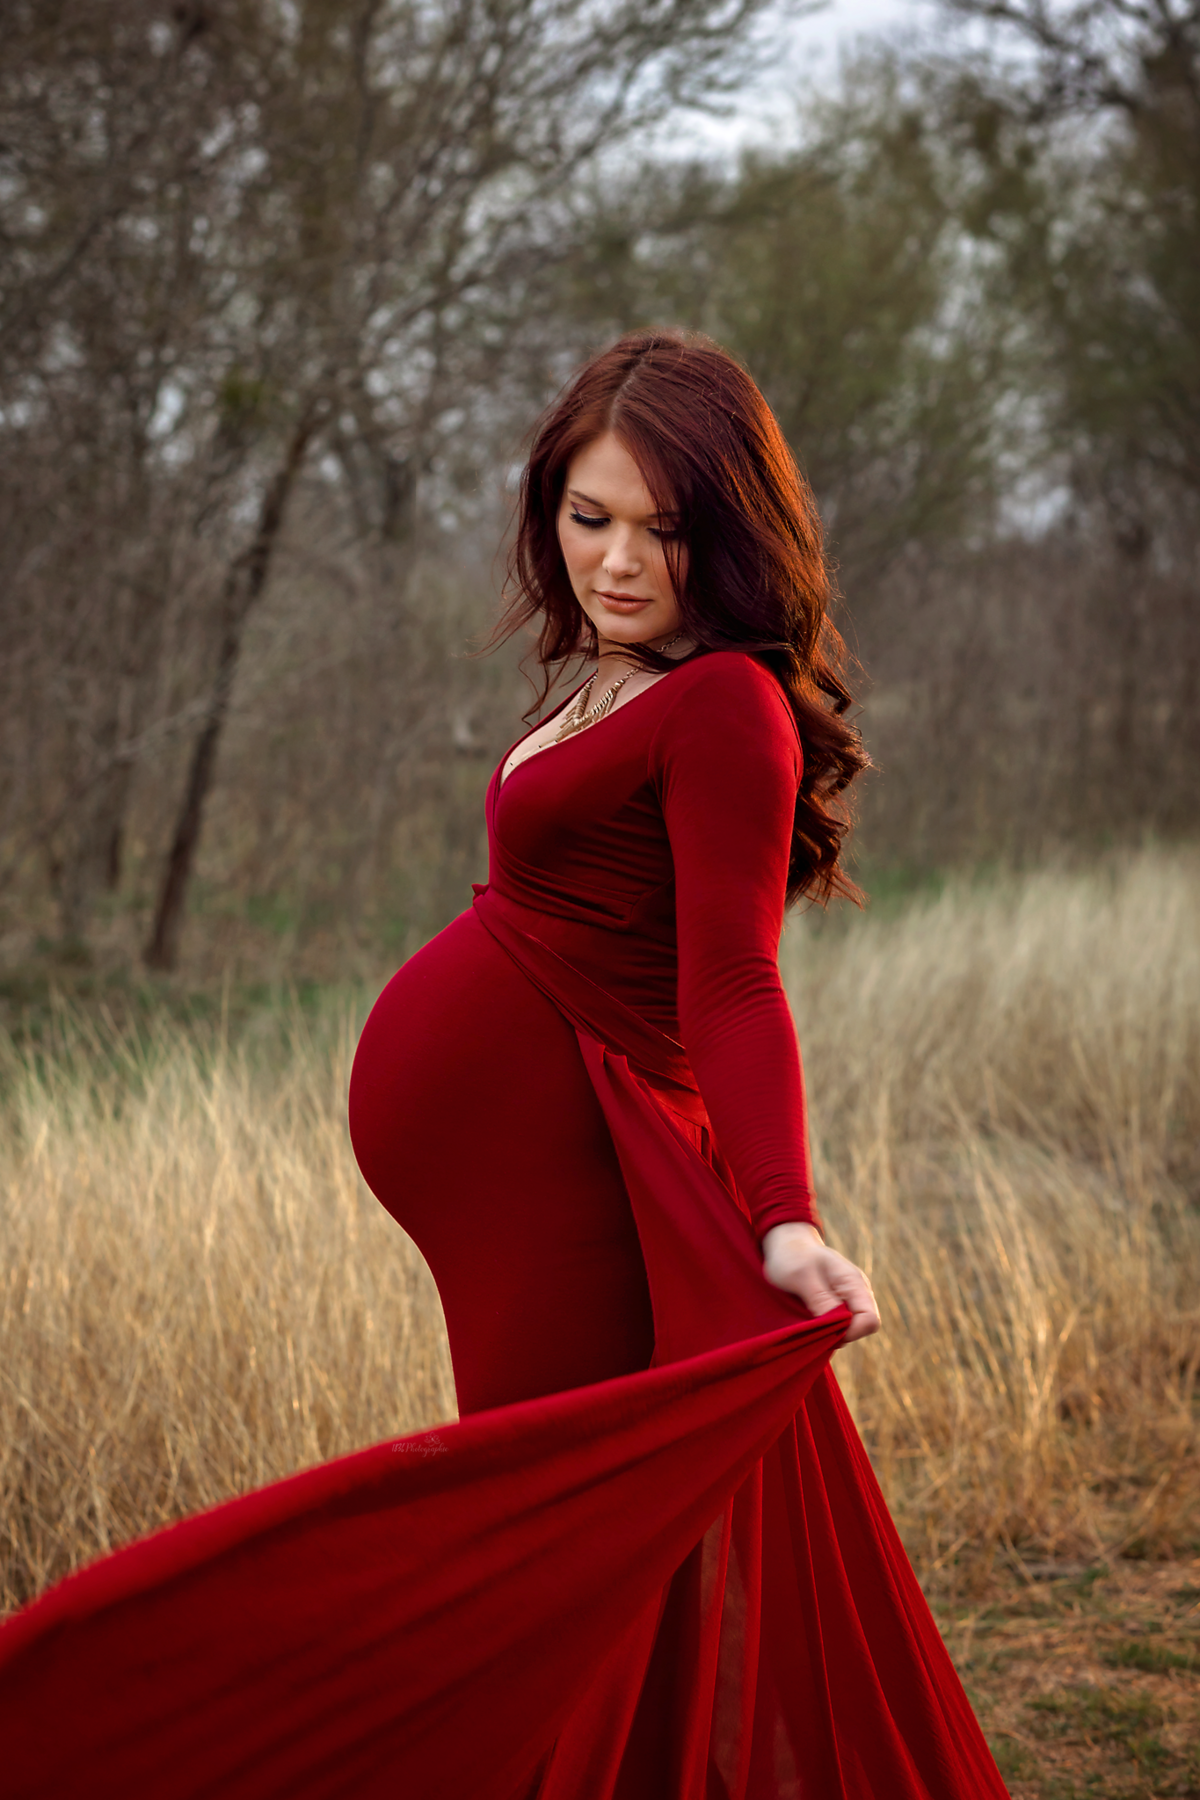 Find serenity in scarlet with our winter maternity session near San Antonio. Our mom-to-be, adorned in a flying dress, brings timeless beauty to the serene winter field backdrop.